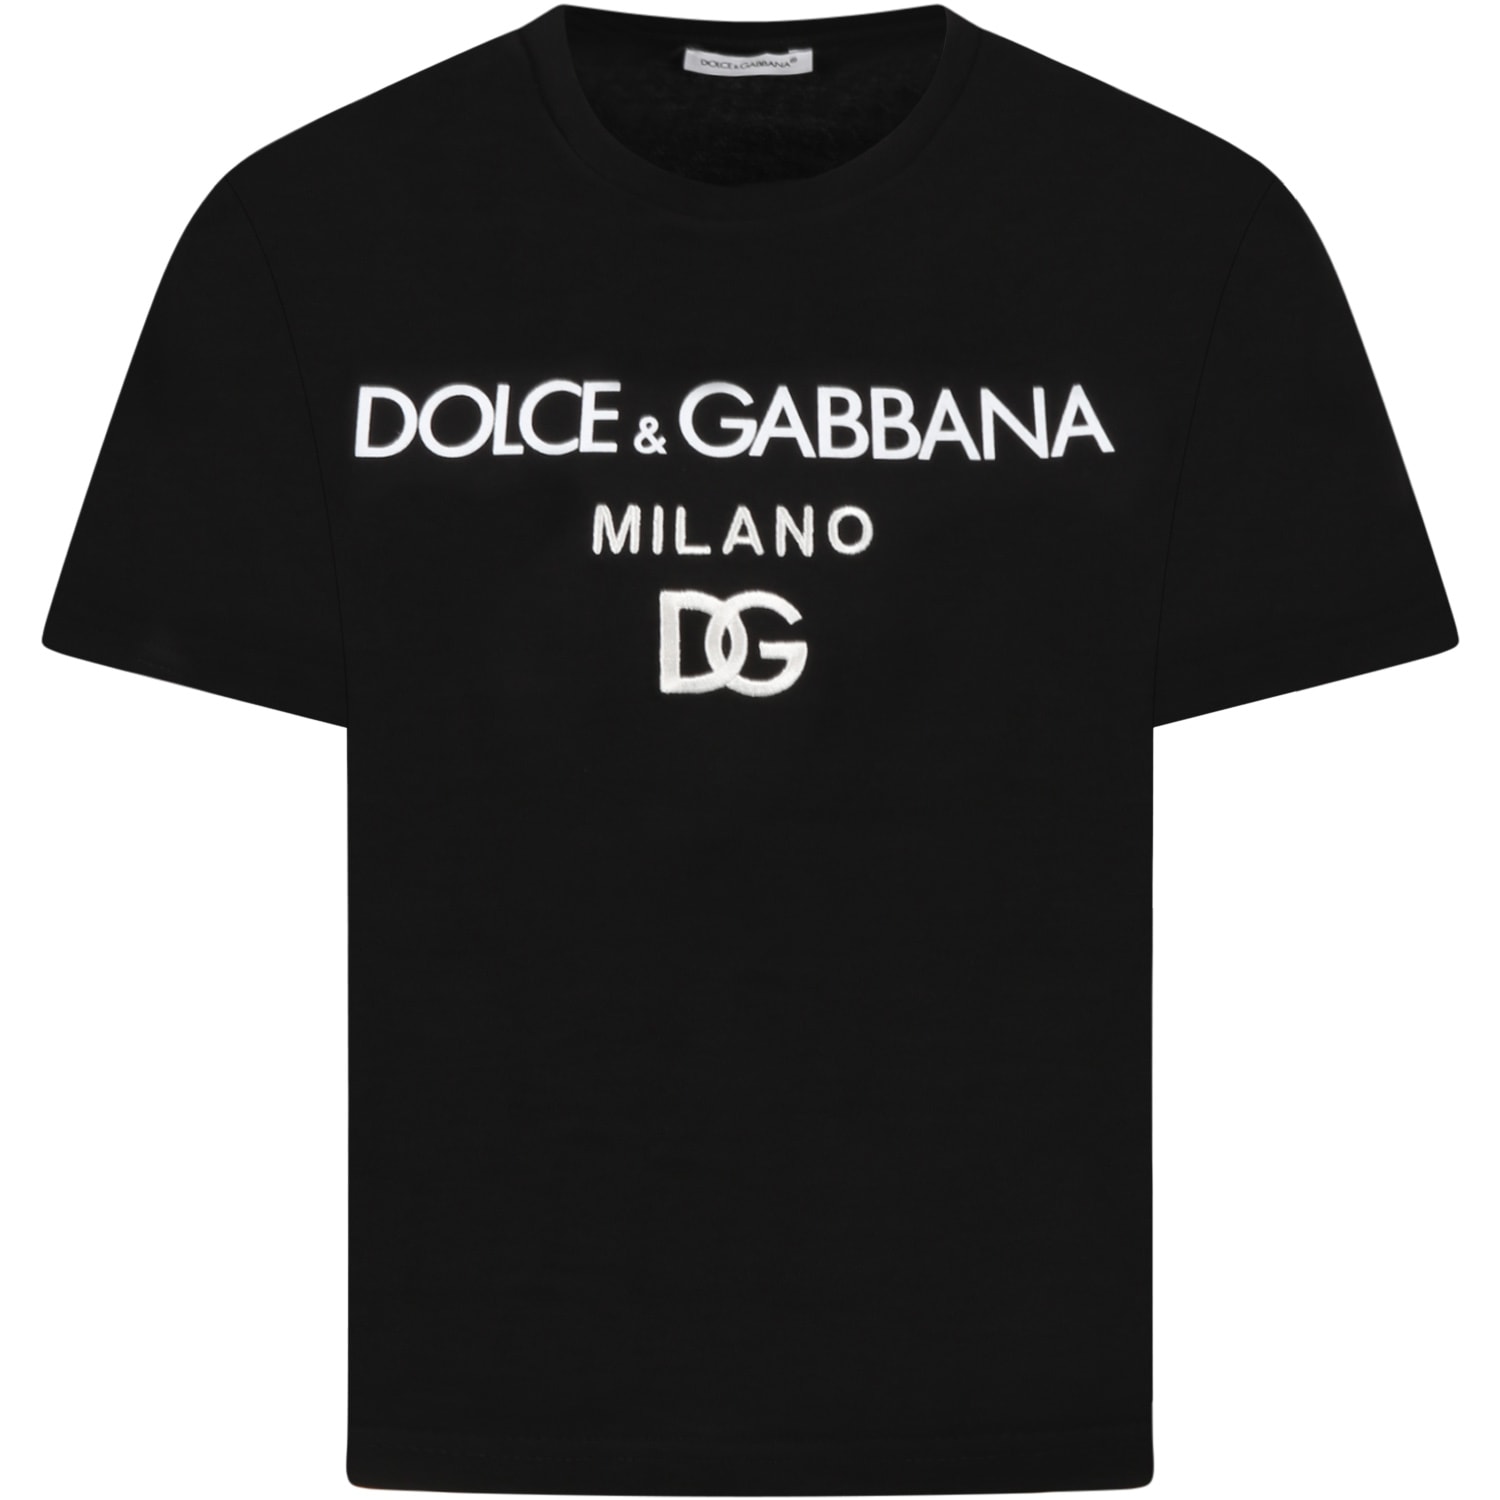 Dolce & Gabbana Black T-shirt For Kids With Logos